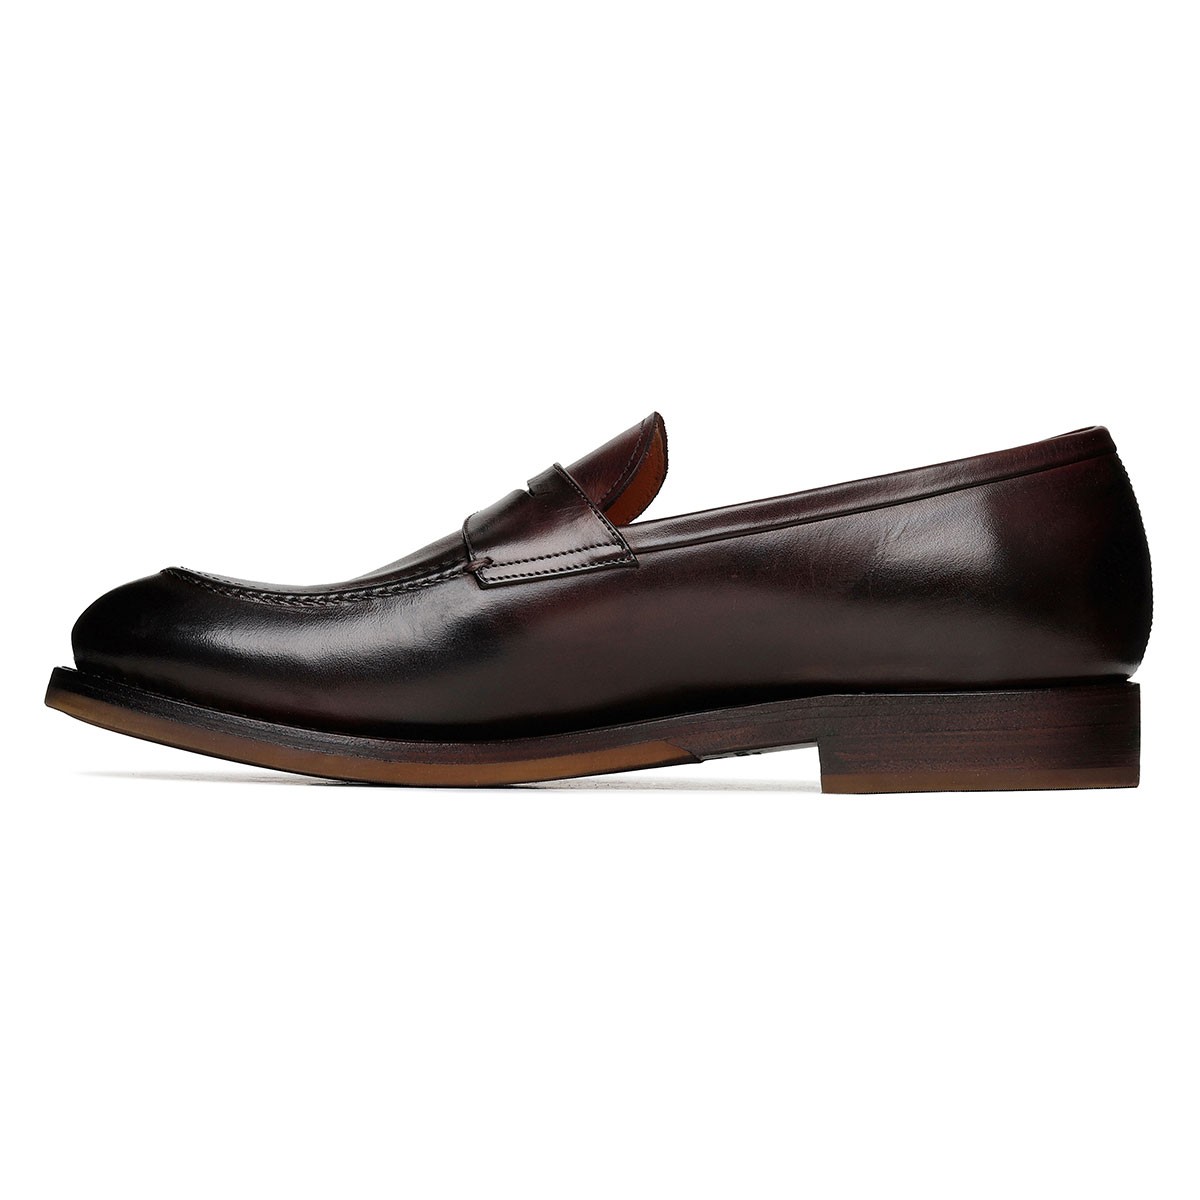 Bologna dark brown leather loafers